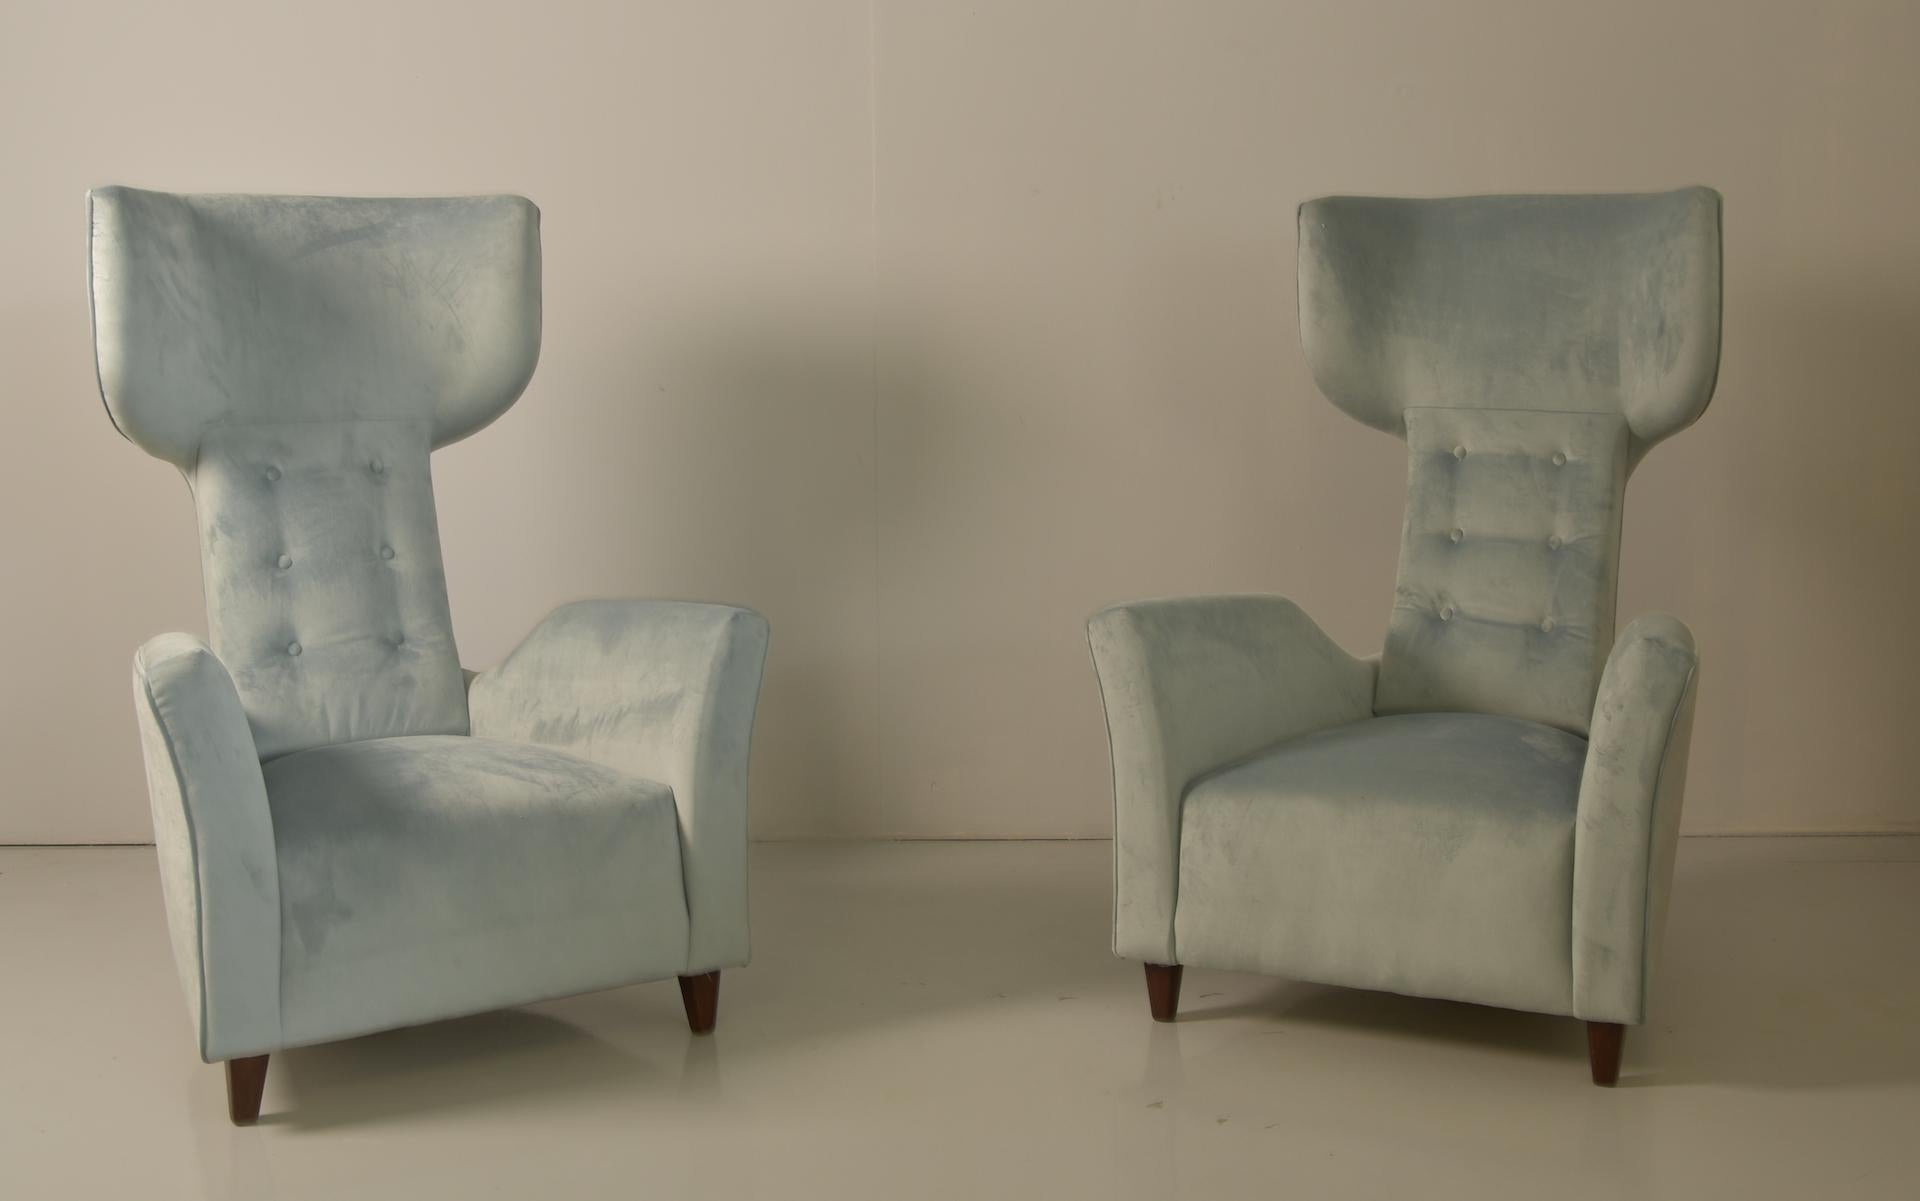 Sculptural pair of armchairs attributed Franco Campi and Carlo Graffi, Italy, 1950.